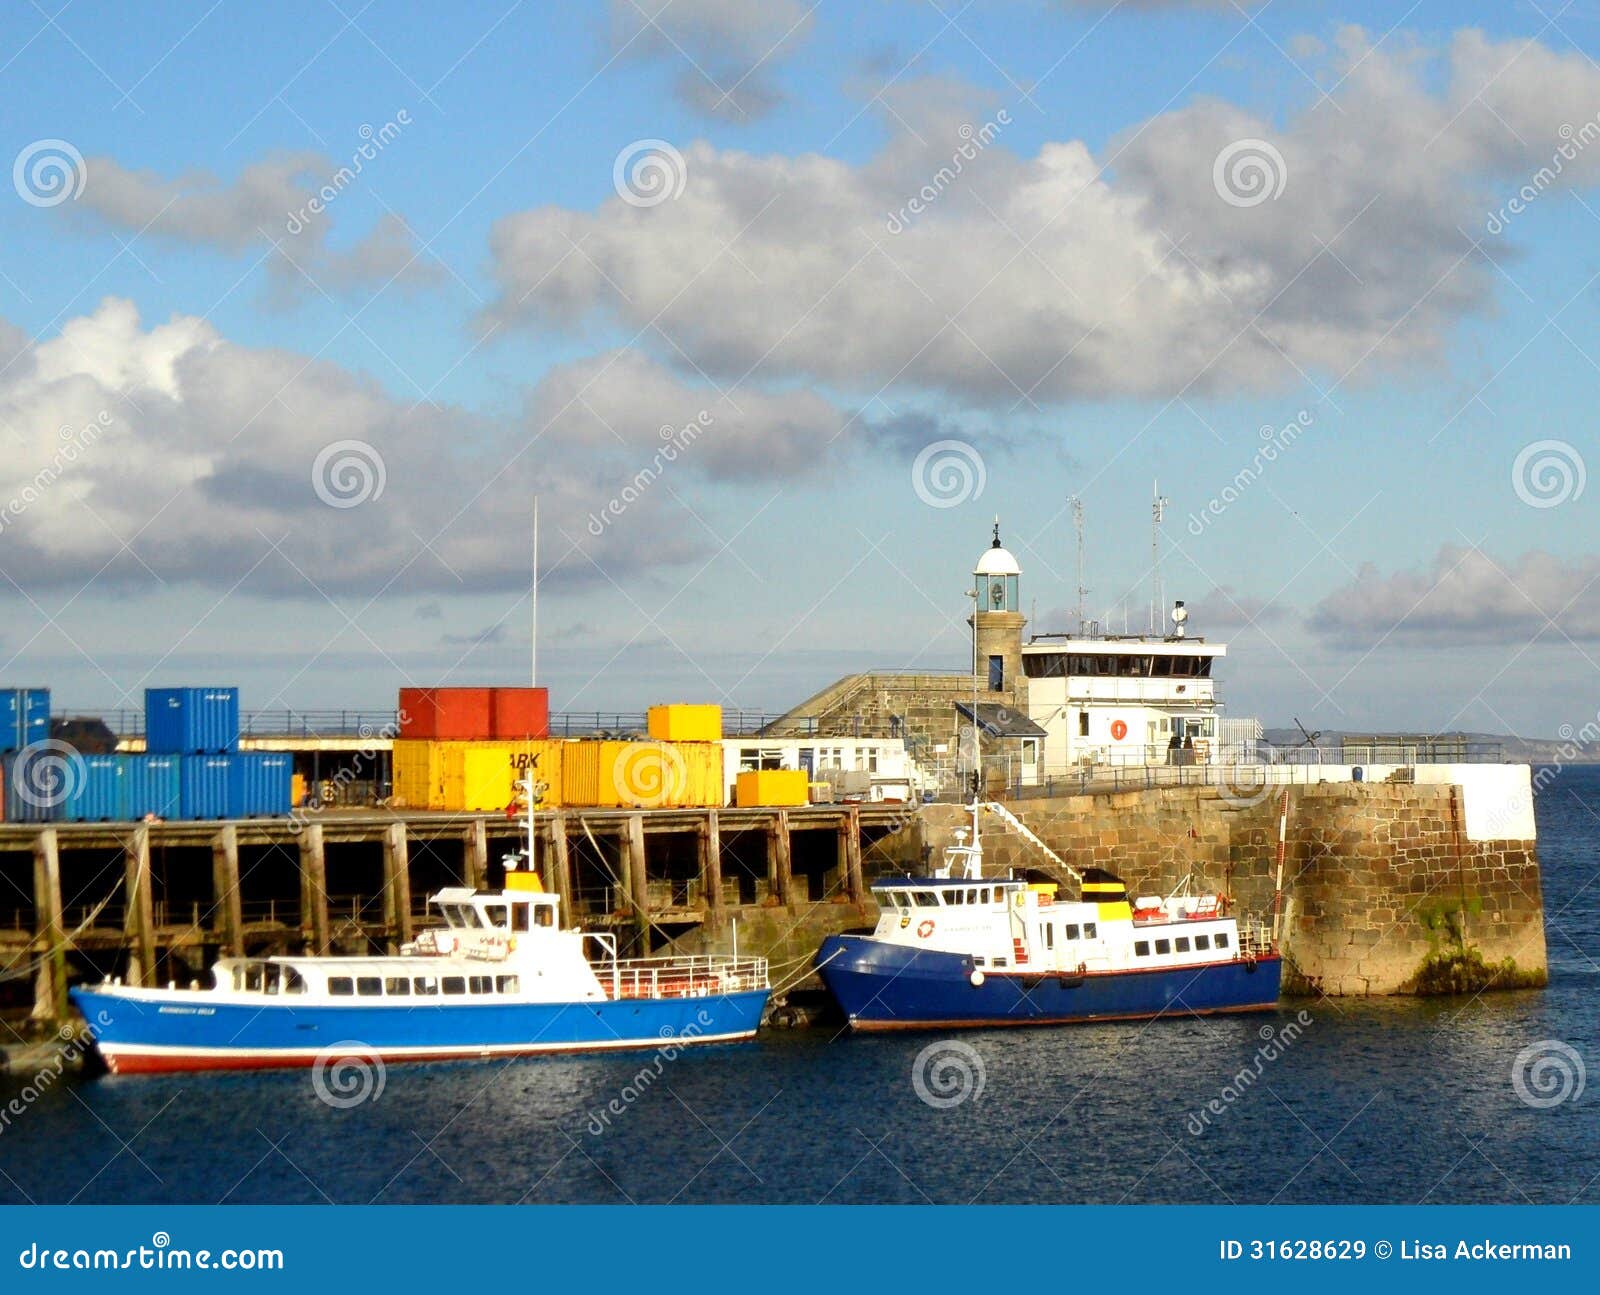 Enumerar Nominal Monje Colorful Port of St Helier, Jersey Editorial Stock Image - Image of yellow,  helier: 31628629